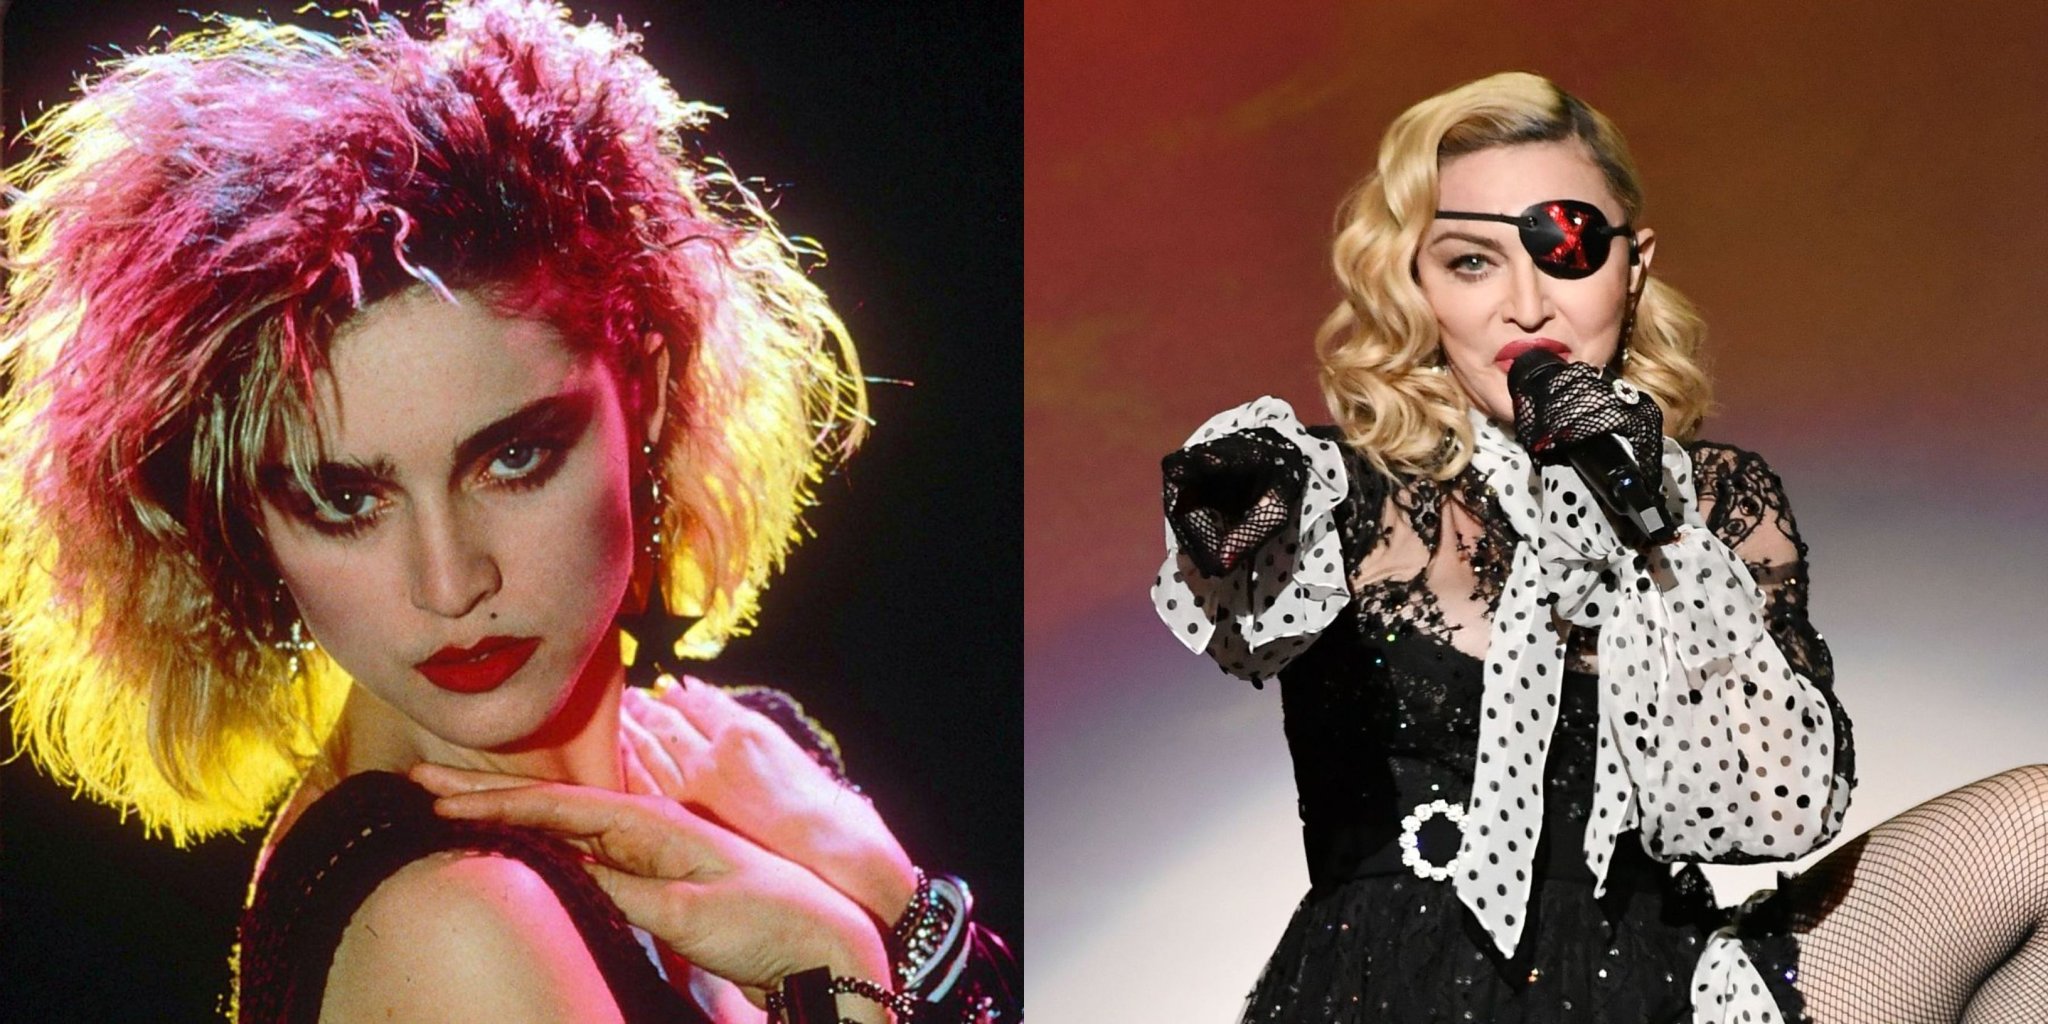 These Pics Show Just How Much Madonna Has Changed Since The 80s